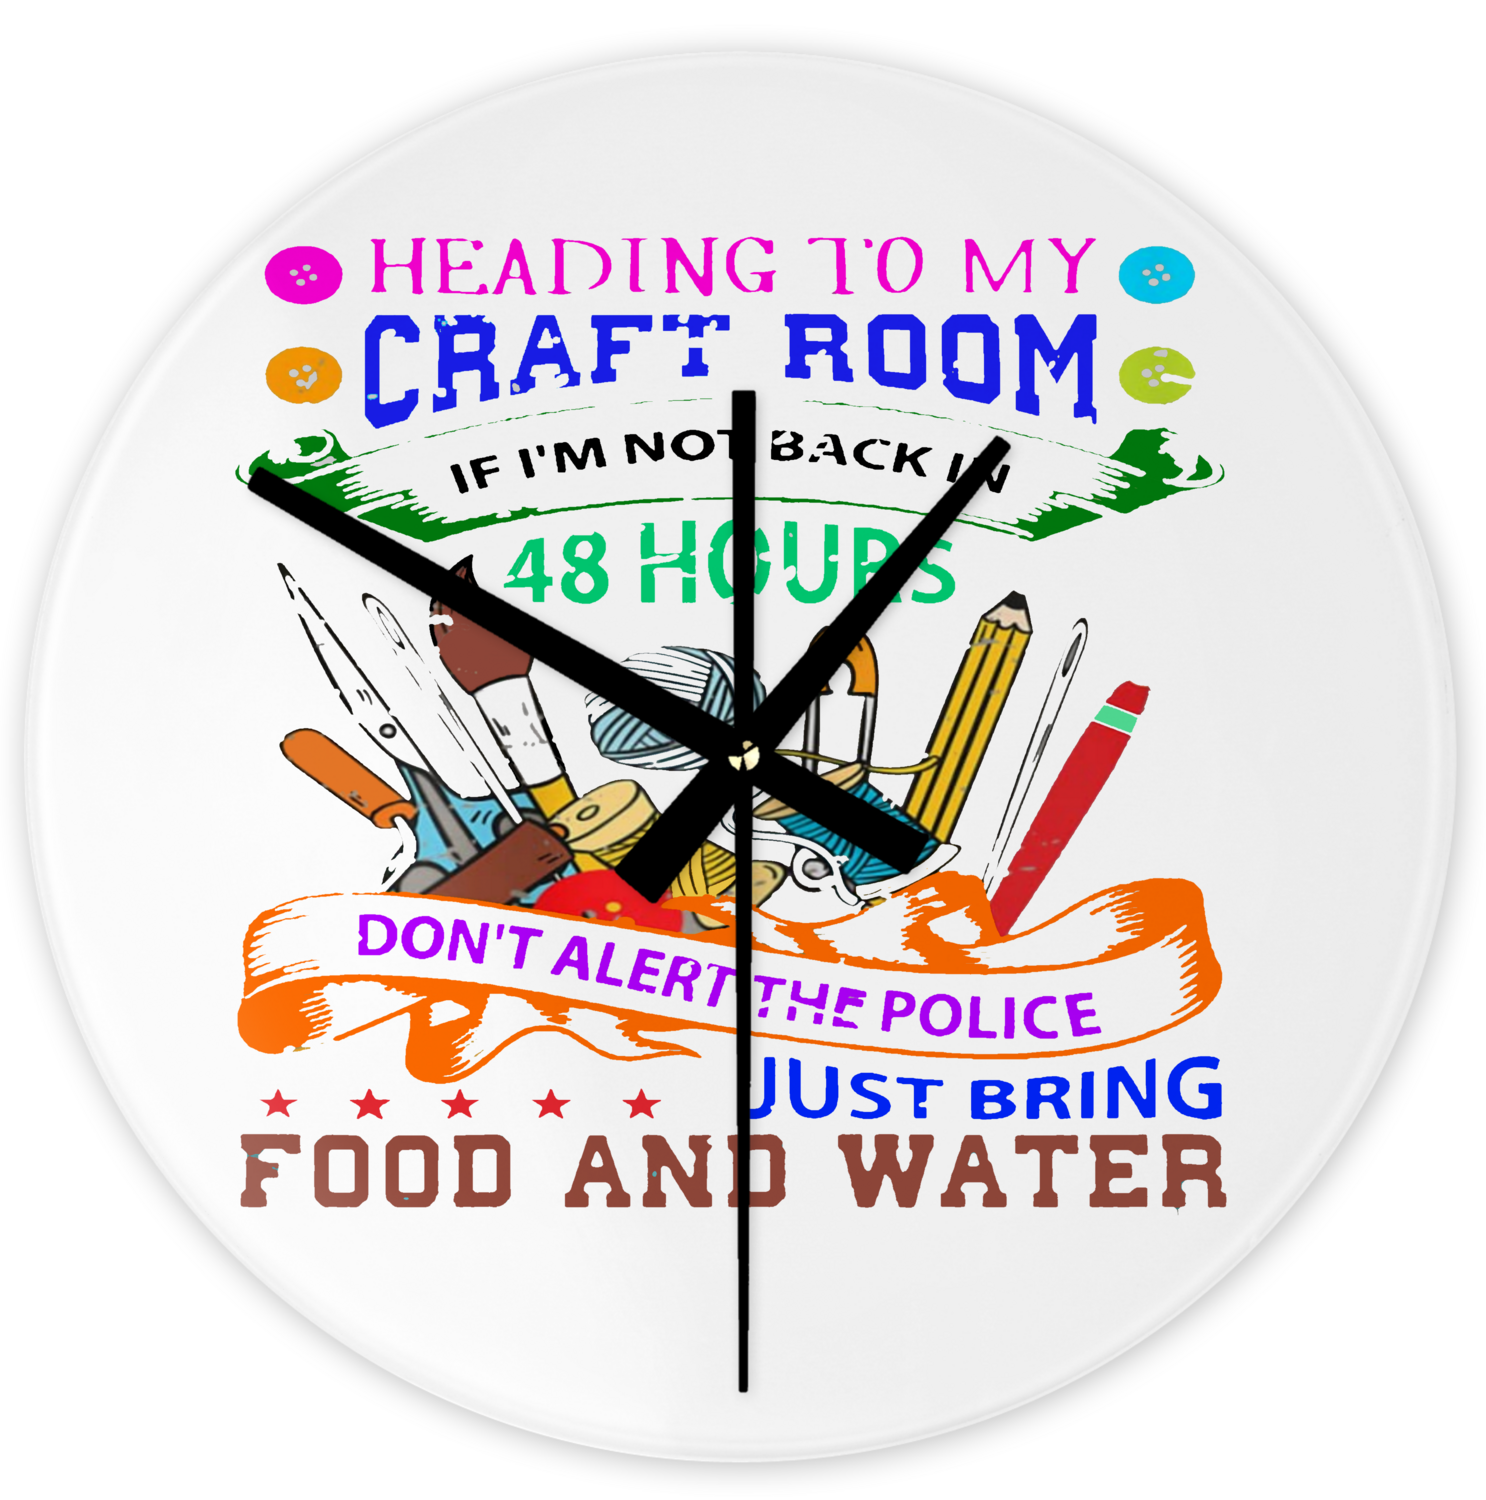 Crafting Clock: HEADING TO MY CRAFT ROOM...IF I'M NOT BACK IN 48 HOURS, DON'T ALERT THE POLICE , JUST BRING FOOD AND WATER